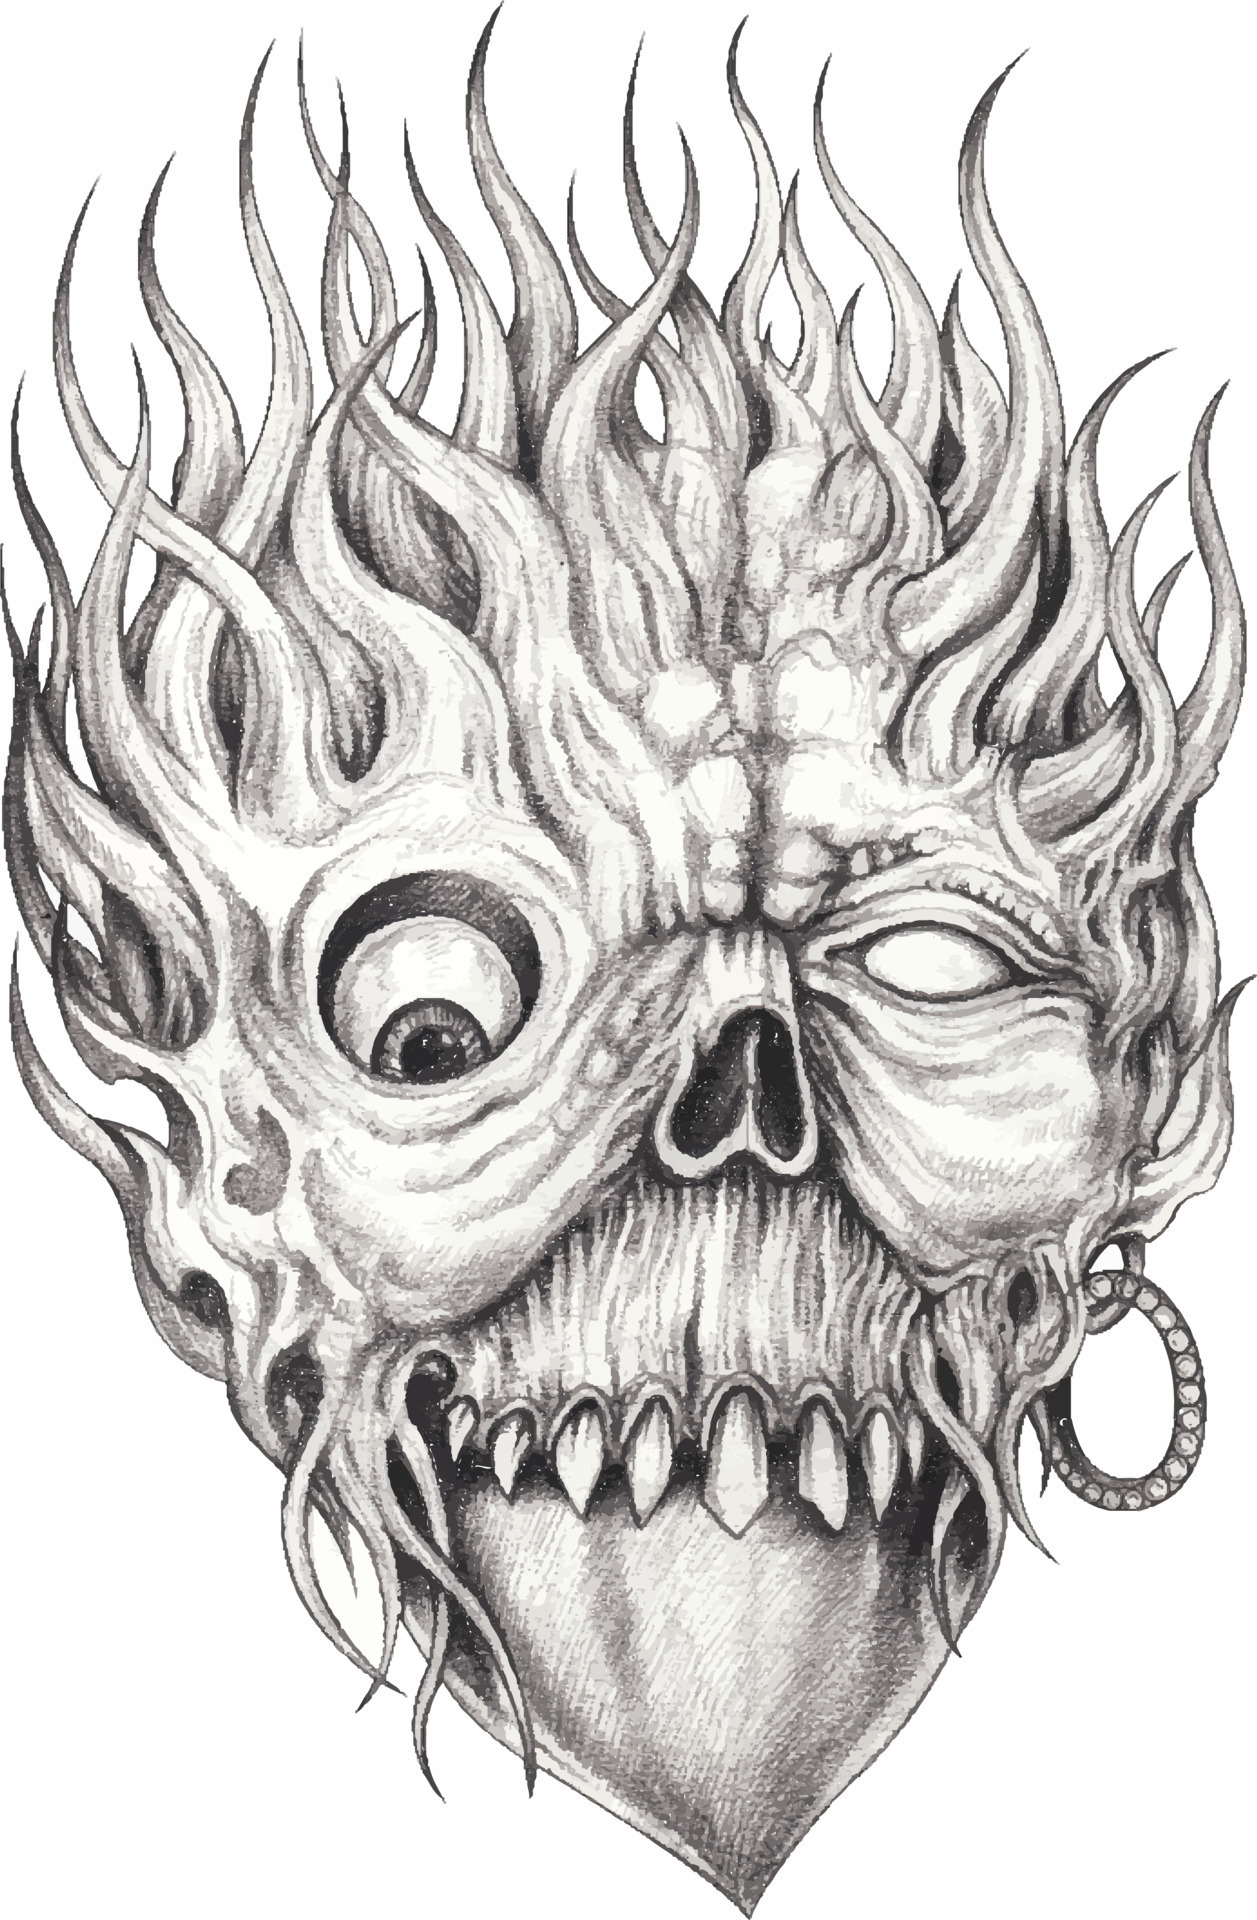 evil skull drawings with flames